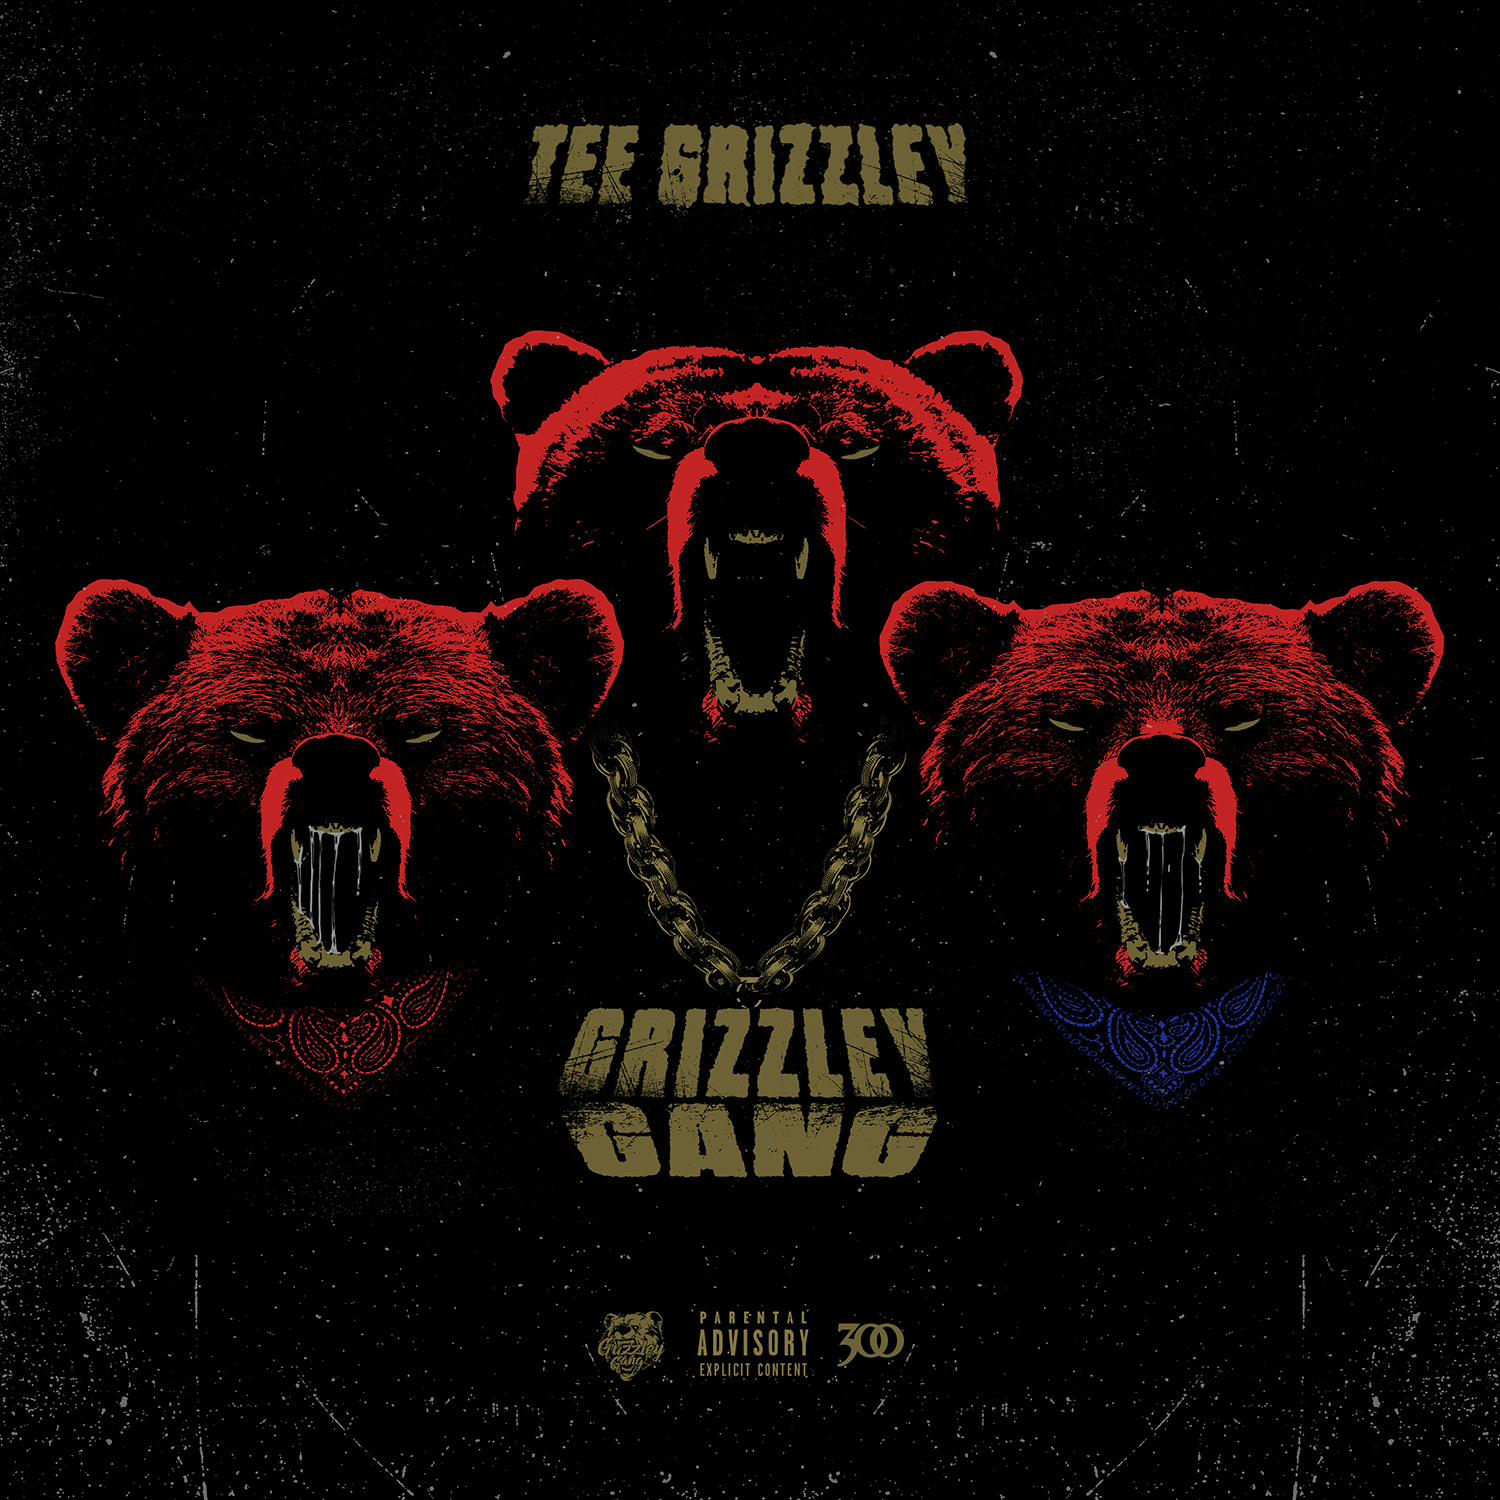 Grizzley Gang